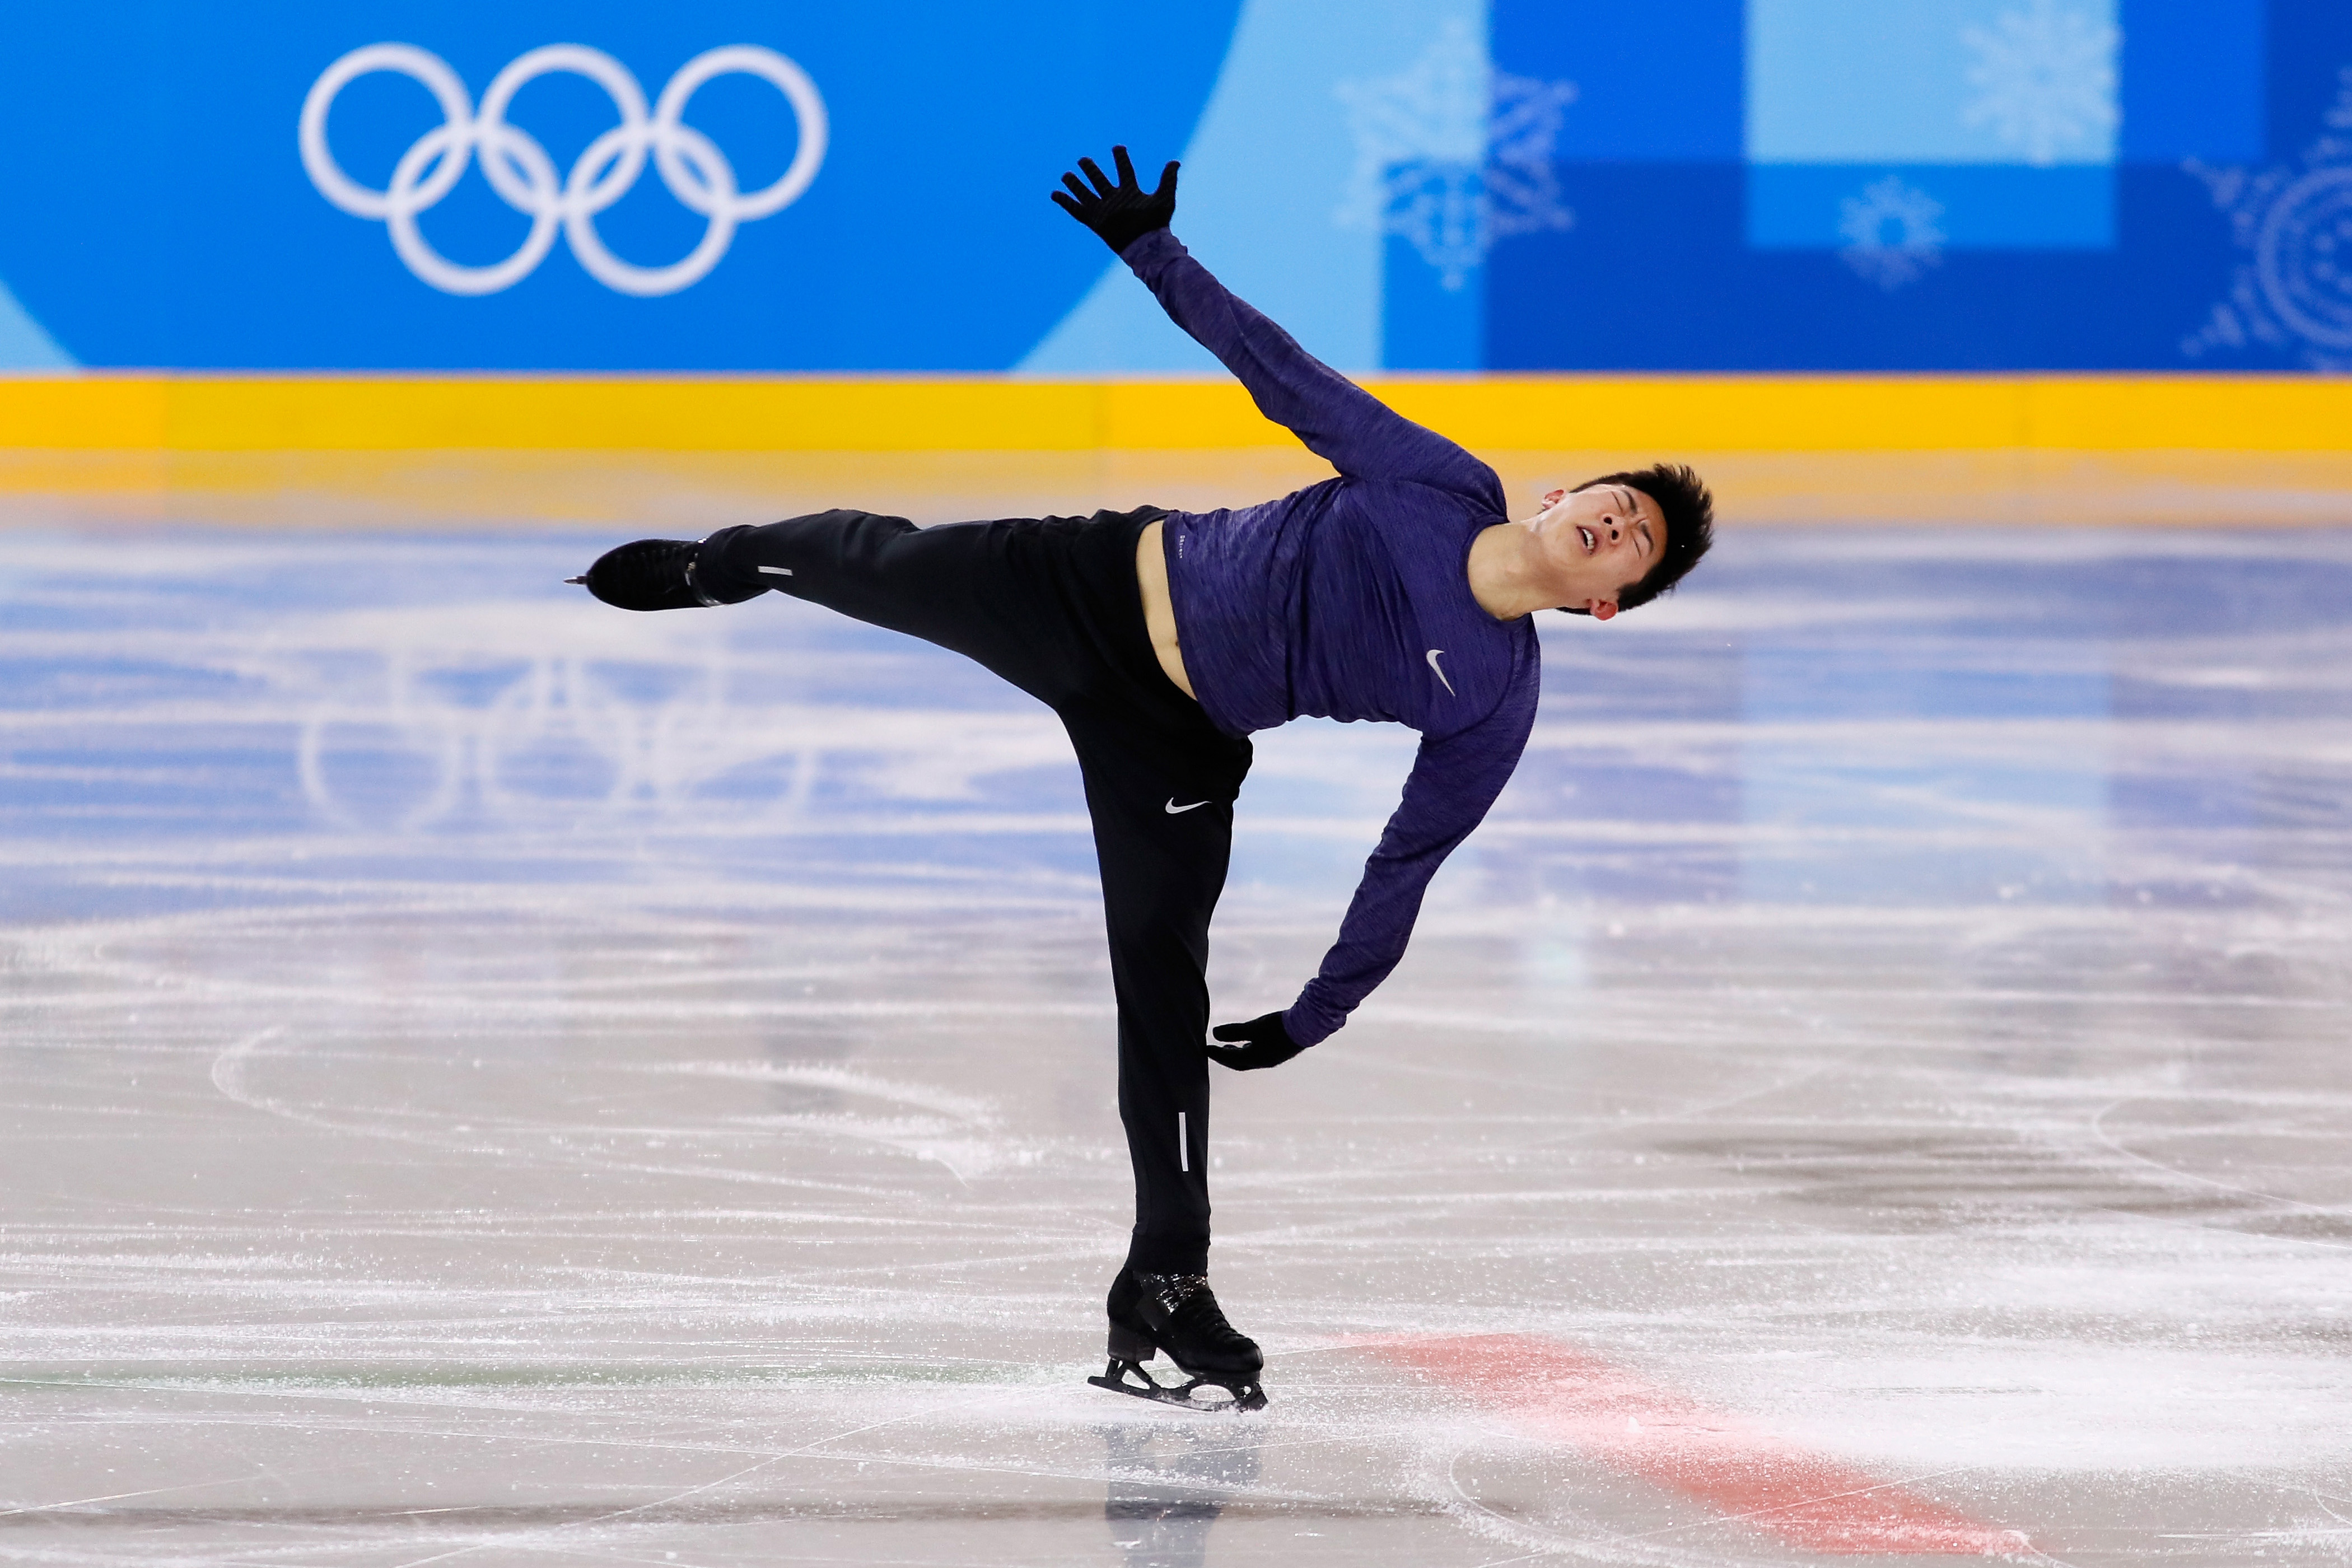 Nathan Chen of the United States trains during figure skating practice ahead of the Pyeongchang 2018 Winter Olympic Games in South Korea. (Jamie Squire/Getty Images)